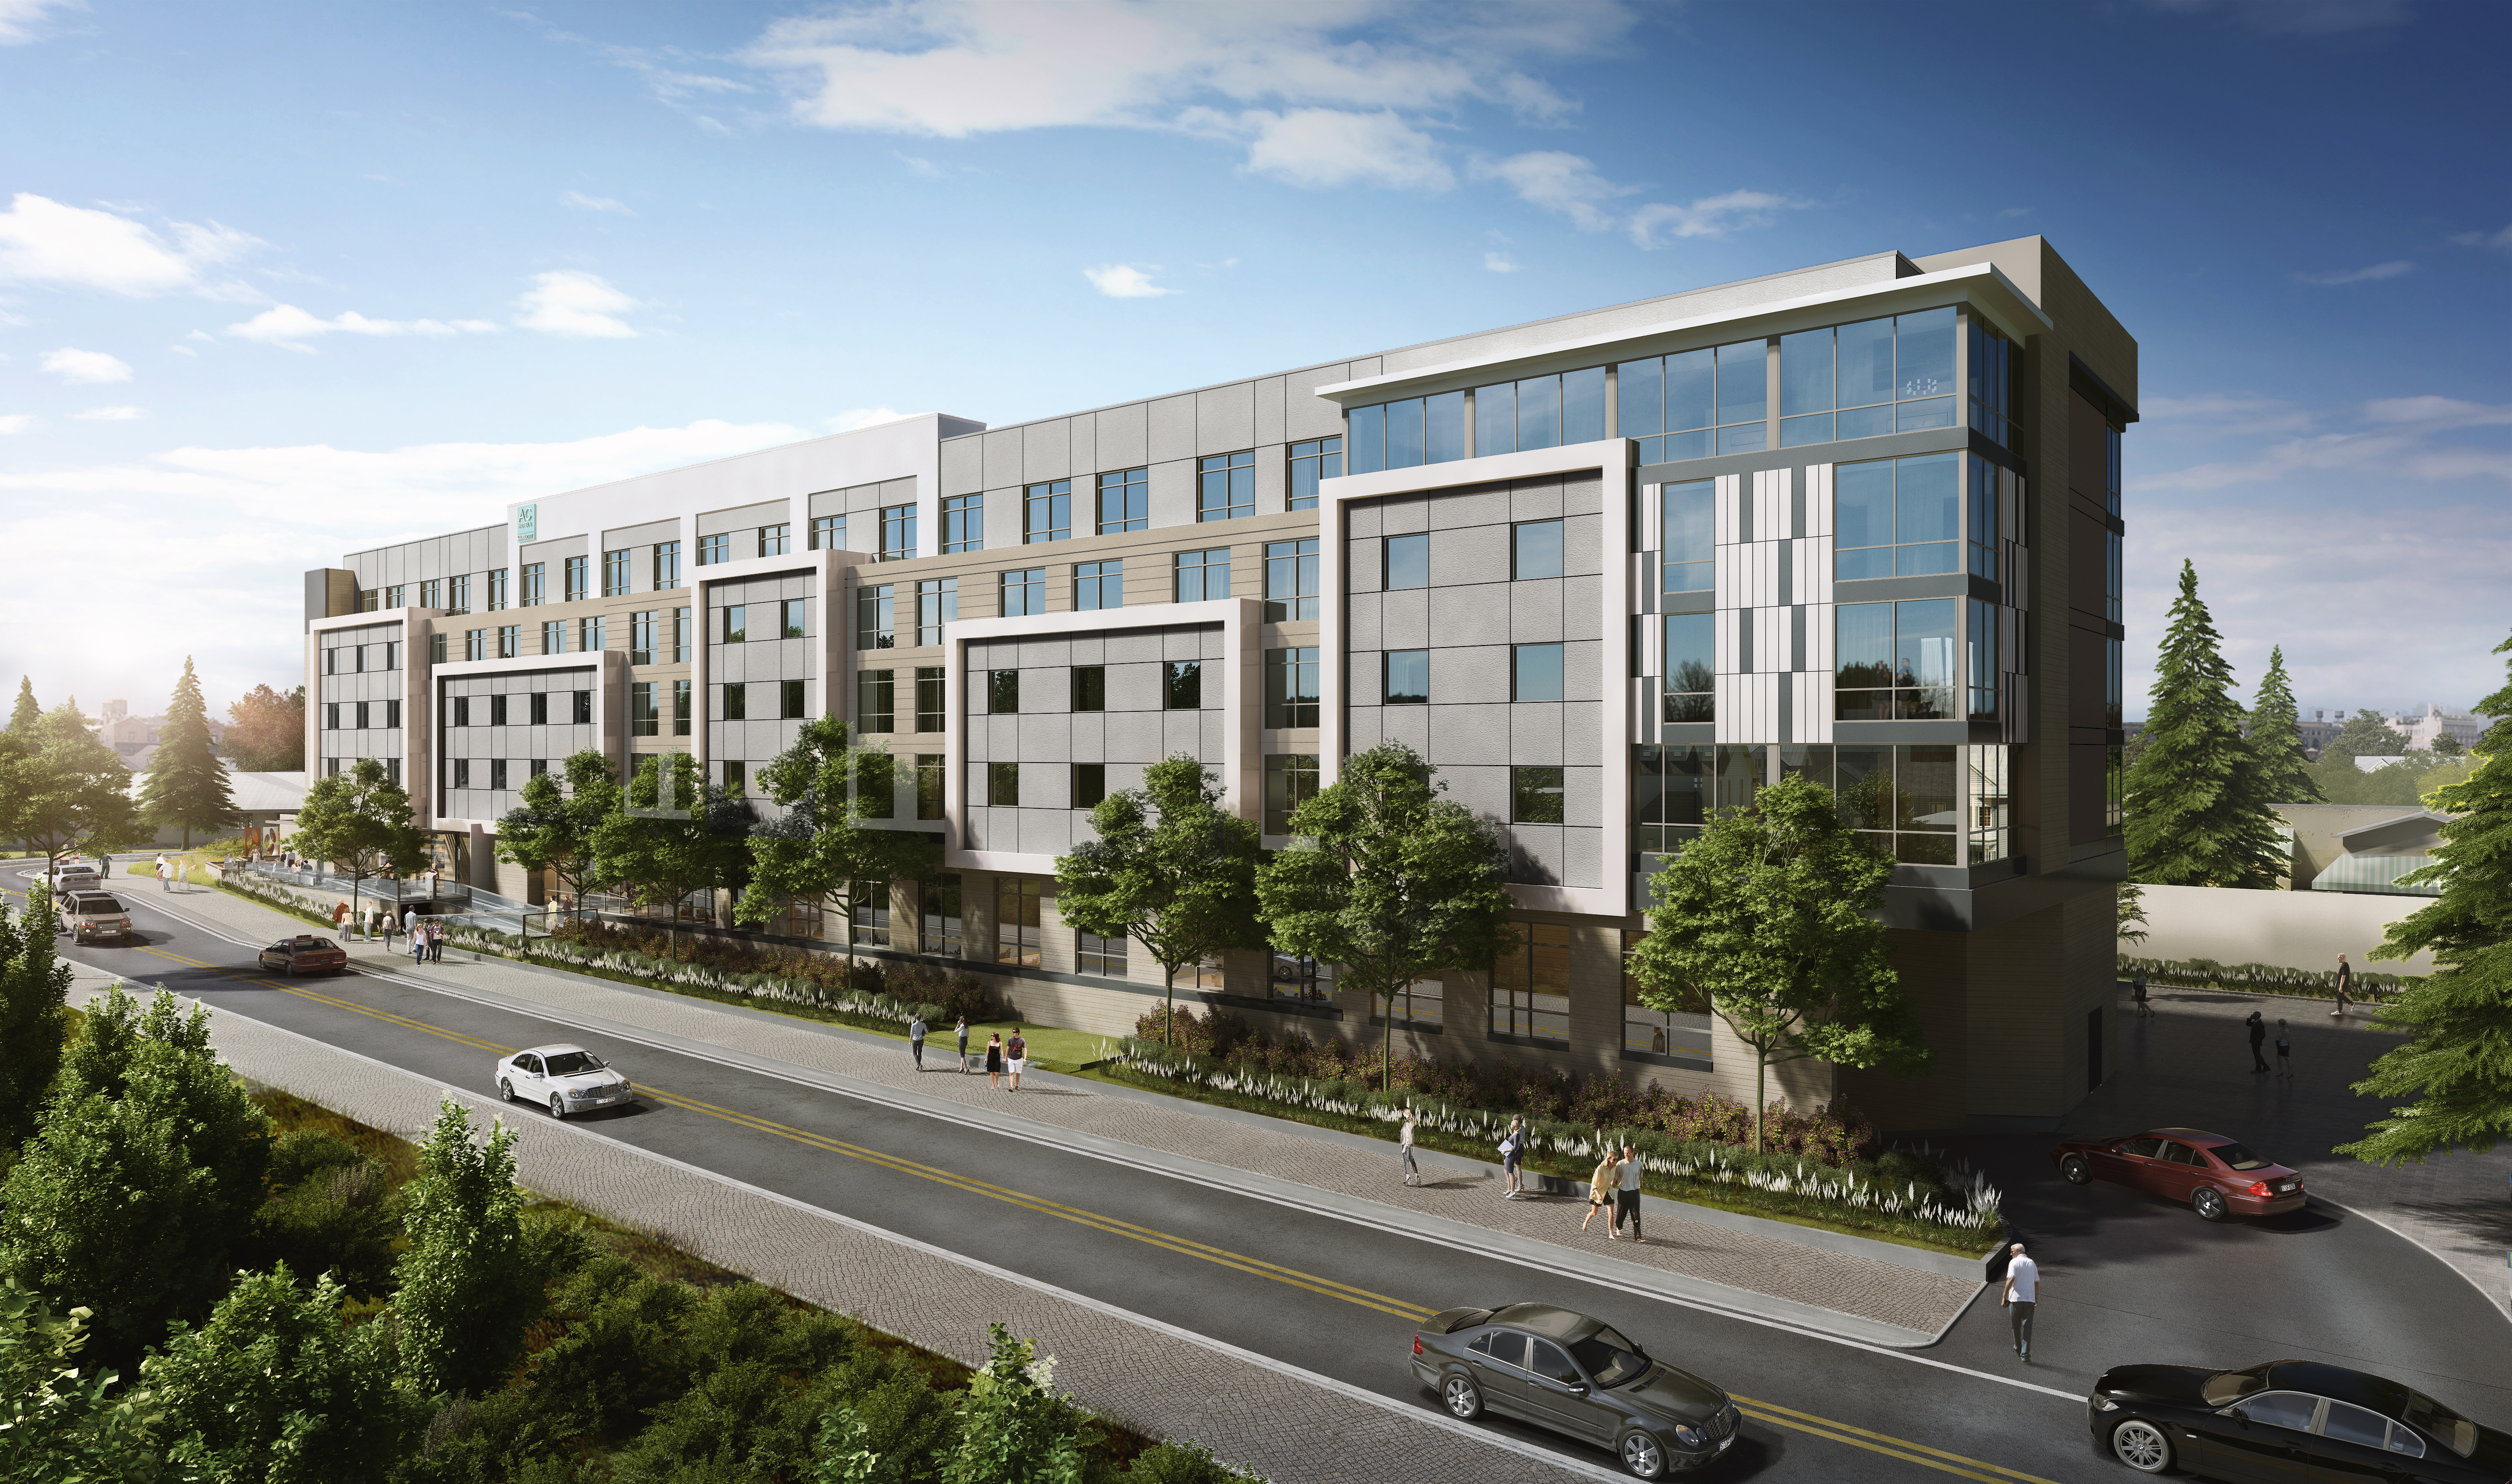 The 182-room AC Hotel Sunnyvale Cupertino is preparing to open its doors this summer The hotel is owned by T2 Hospitality an